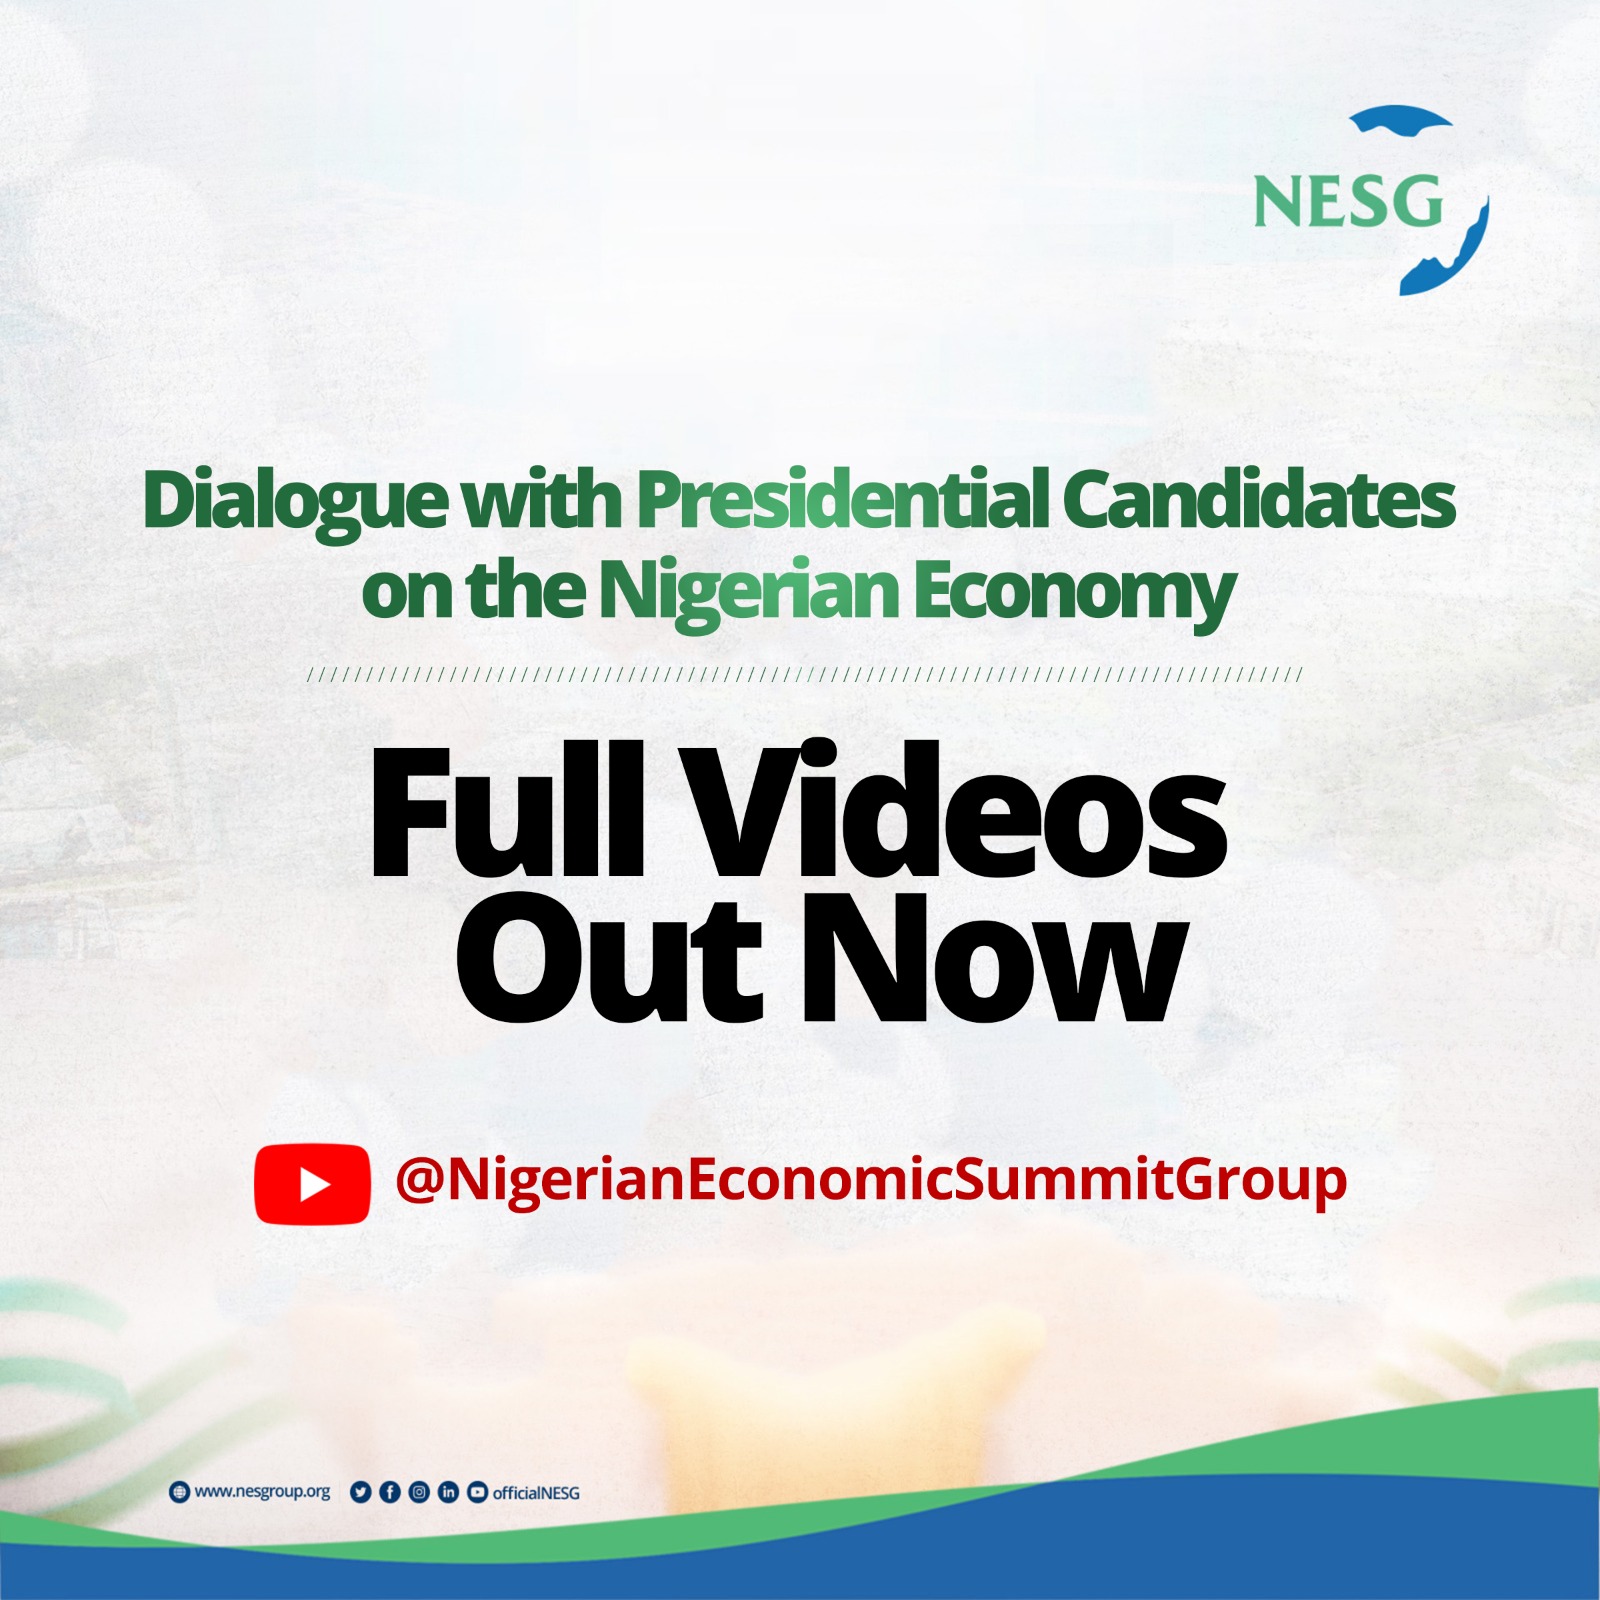 Dialogue with Presidential Candidates on the Nigerian Economy - FULL VIDEO OUT